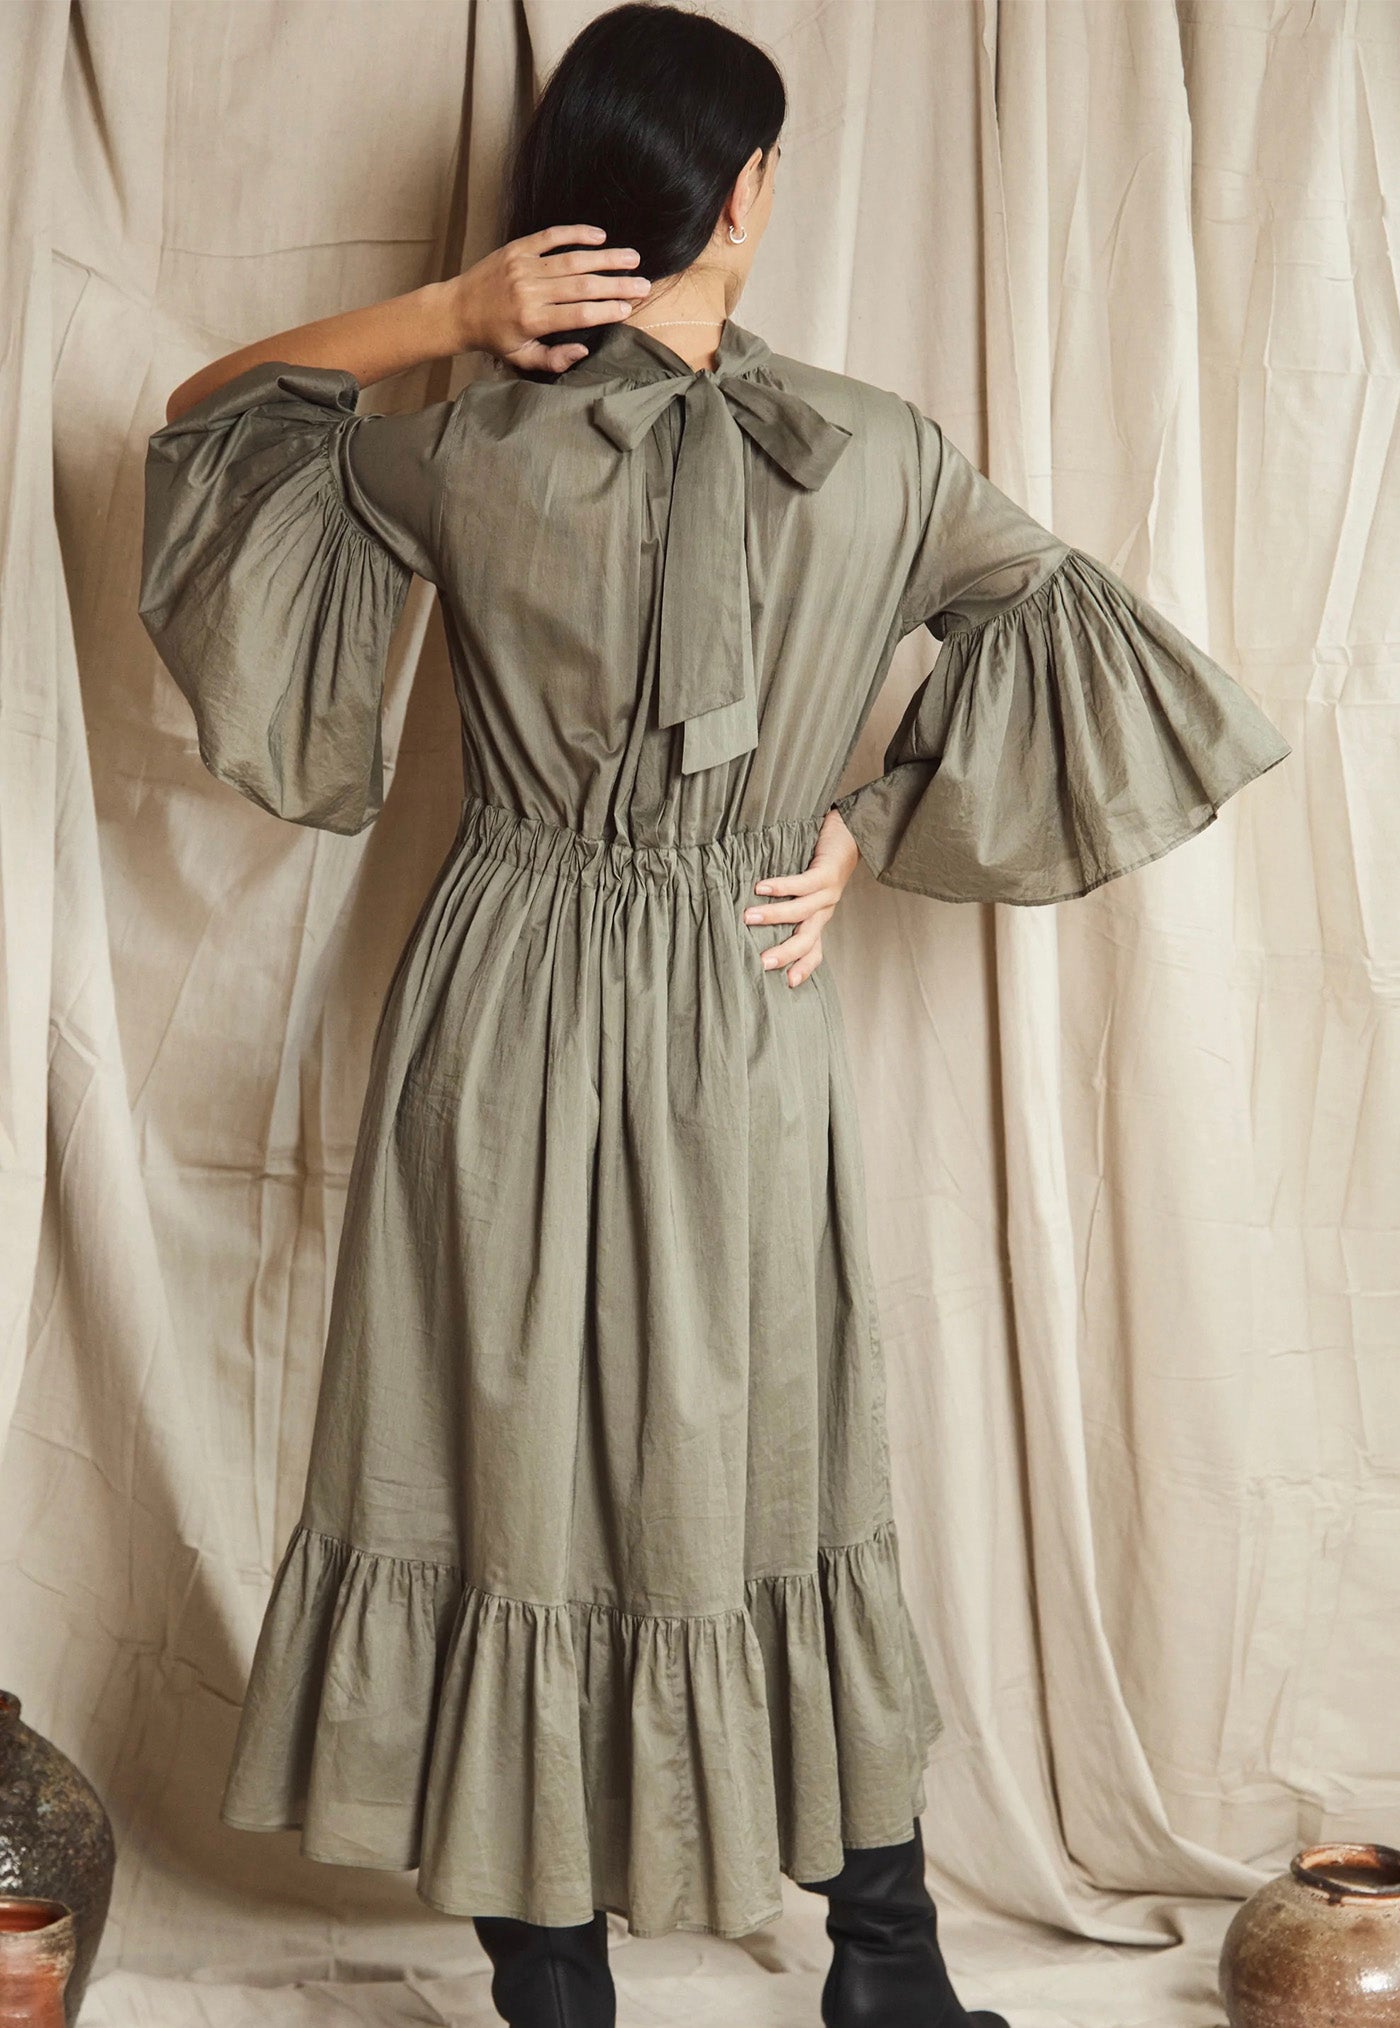 O'Keeffe Dress - Sage Cotton Voile sold by Angel Divine